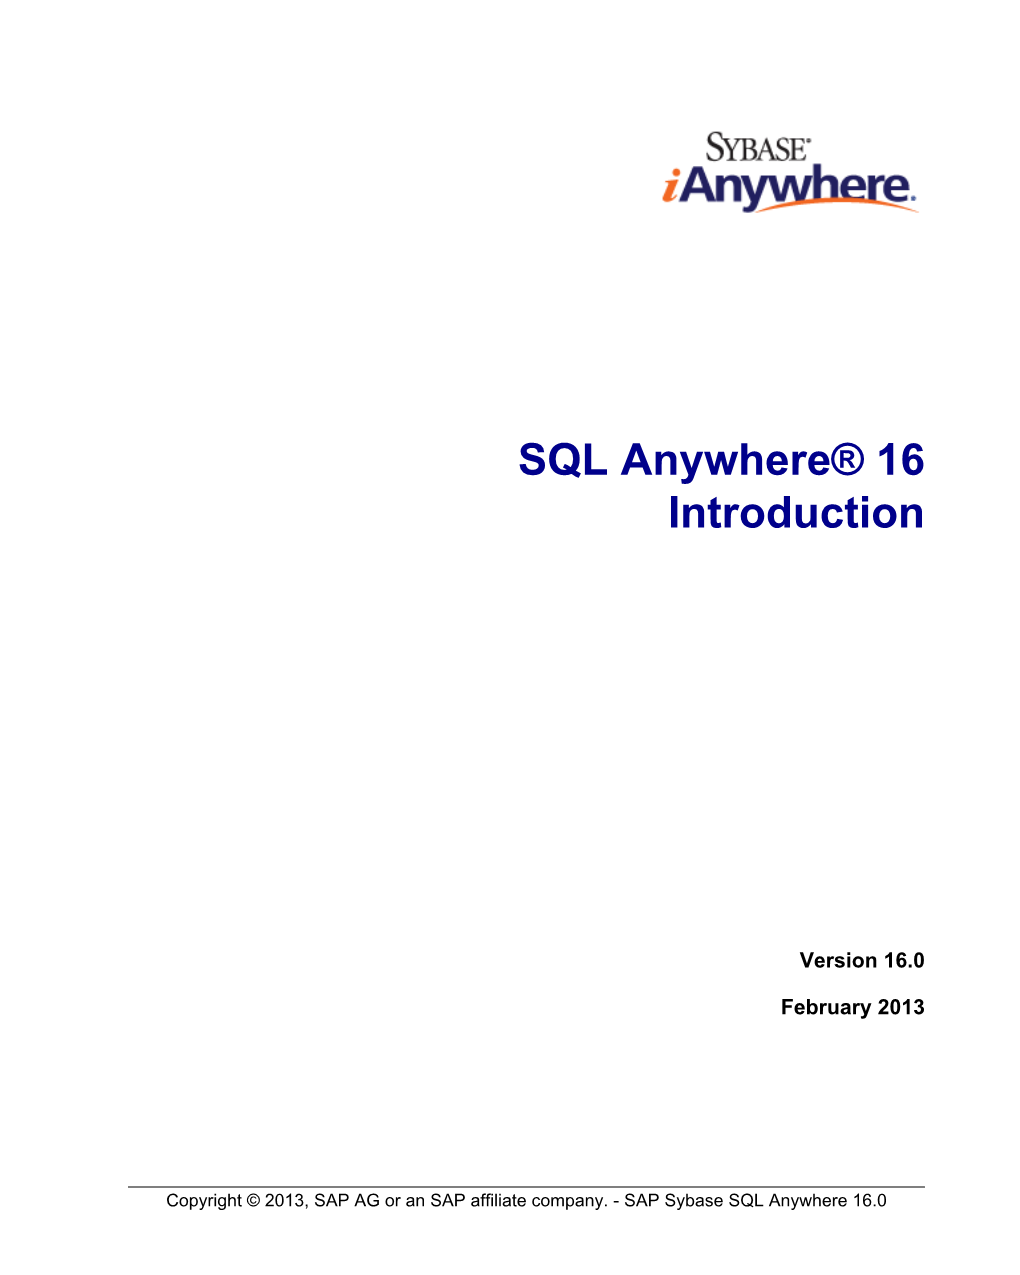 SQL Anywhere® 16 Introduction